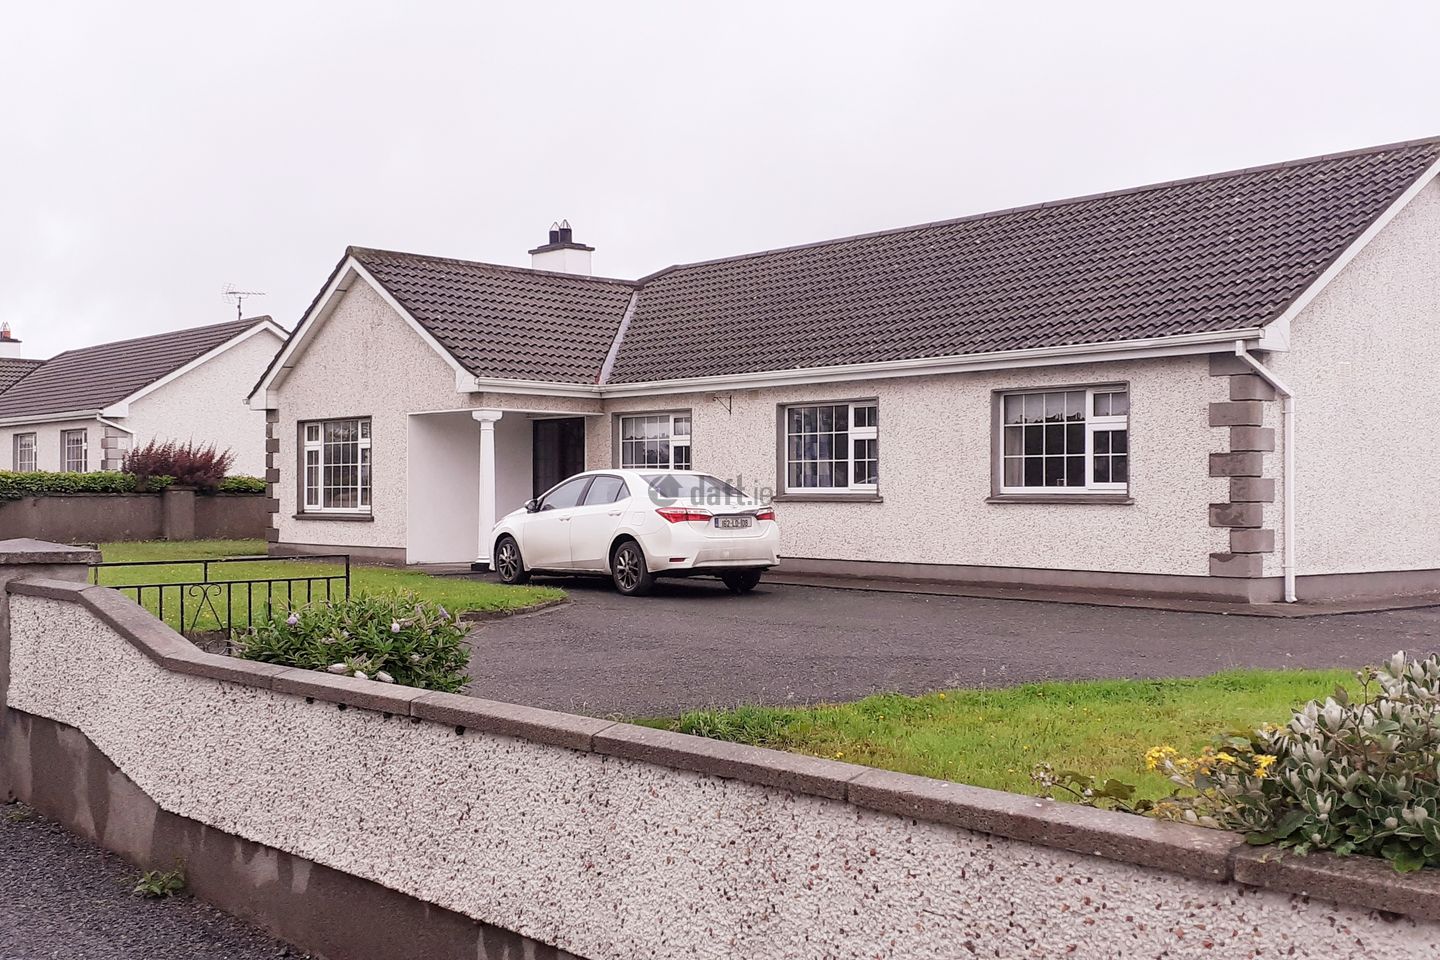 Carra, Granard, Co. Longford is for rent on Daft.ie